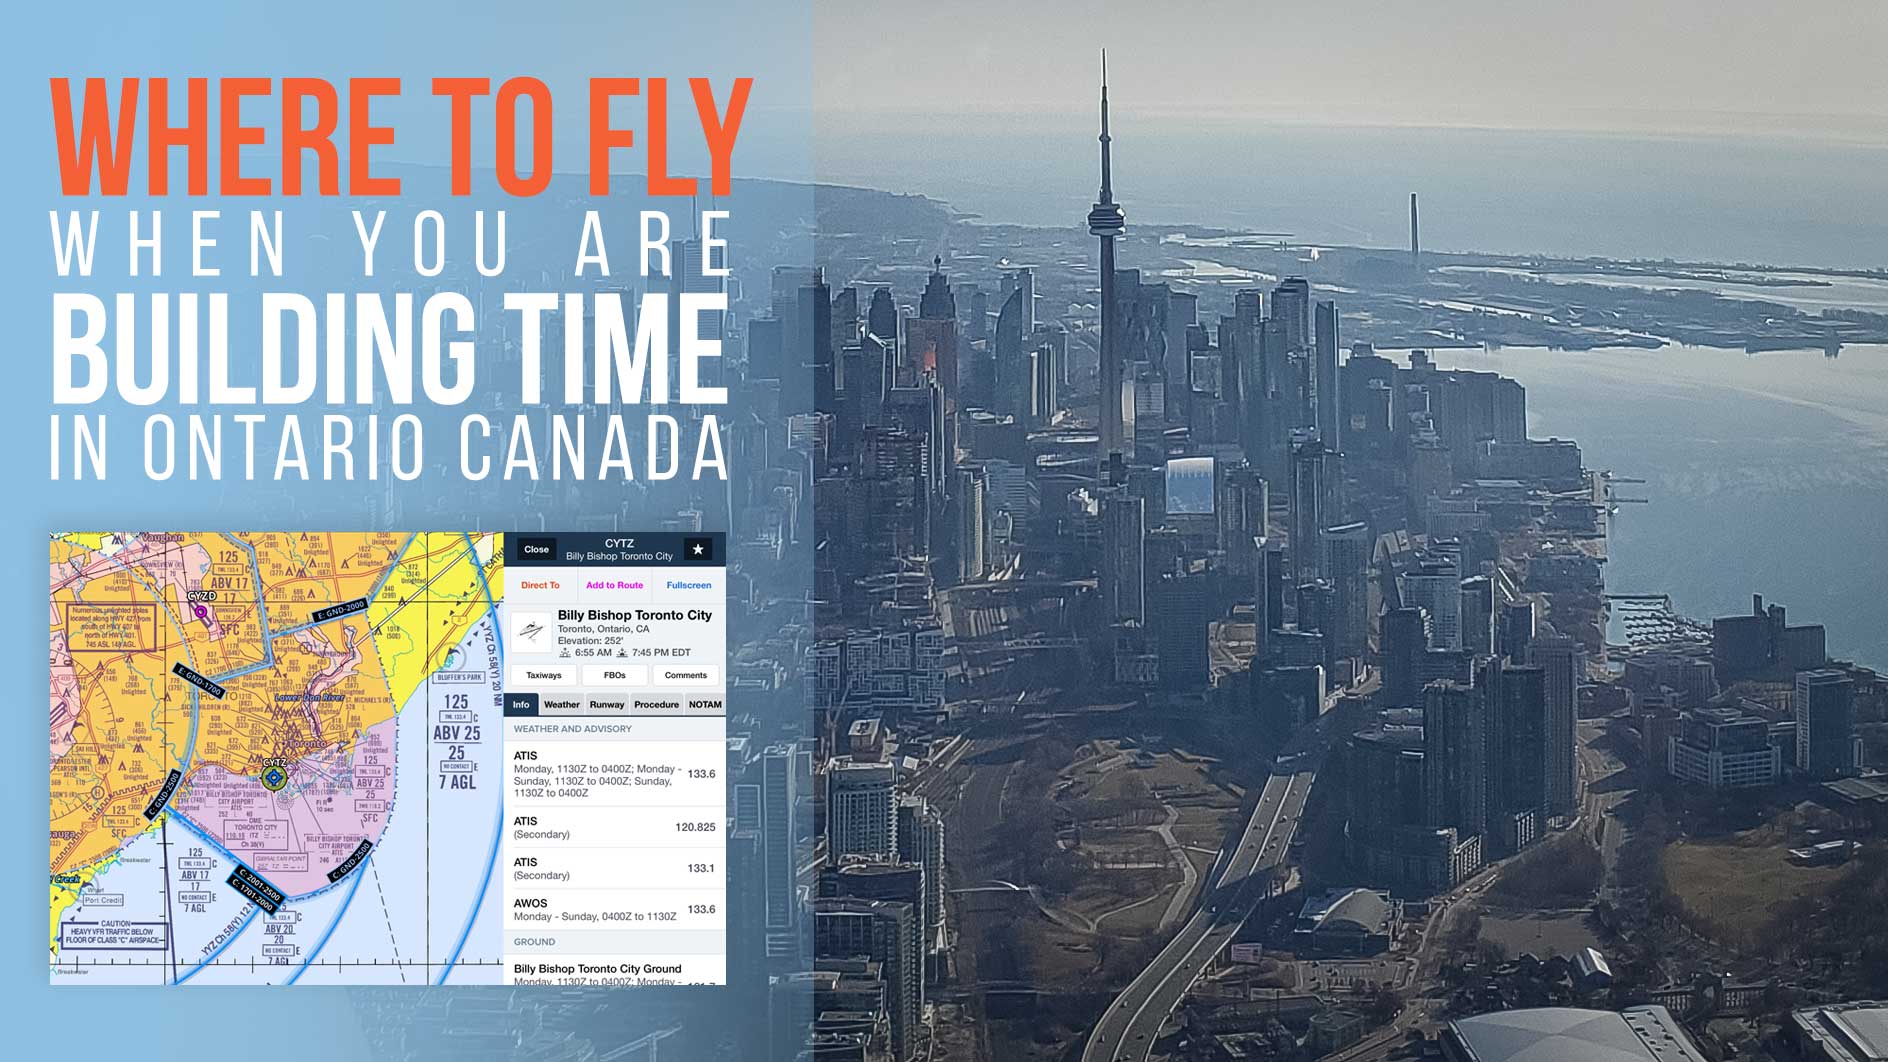 Where to fly in Ontario Canada